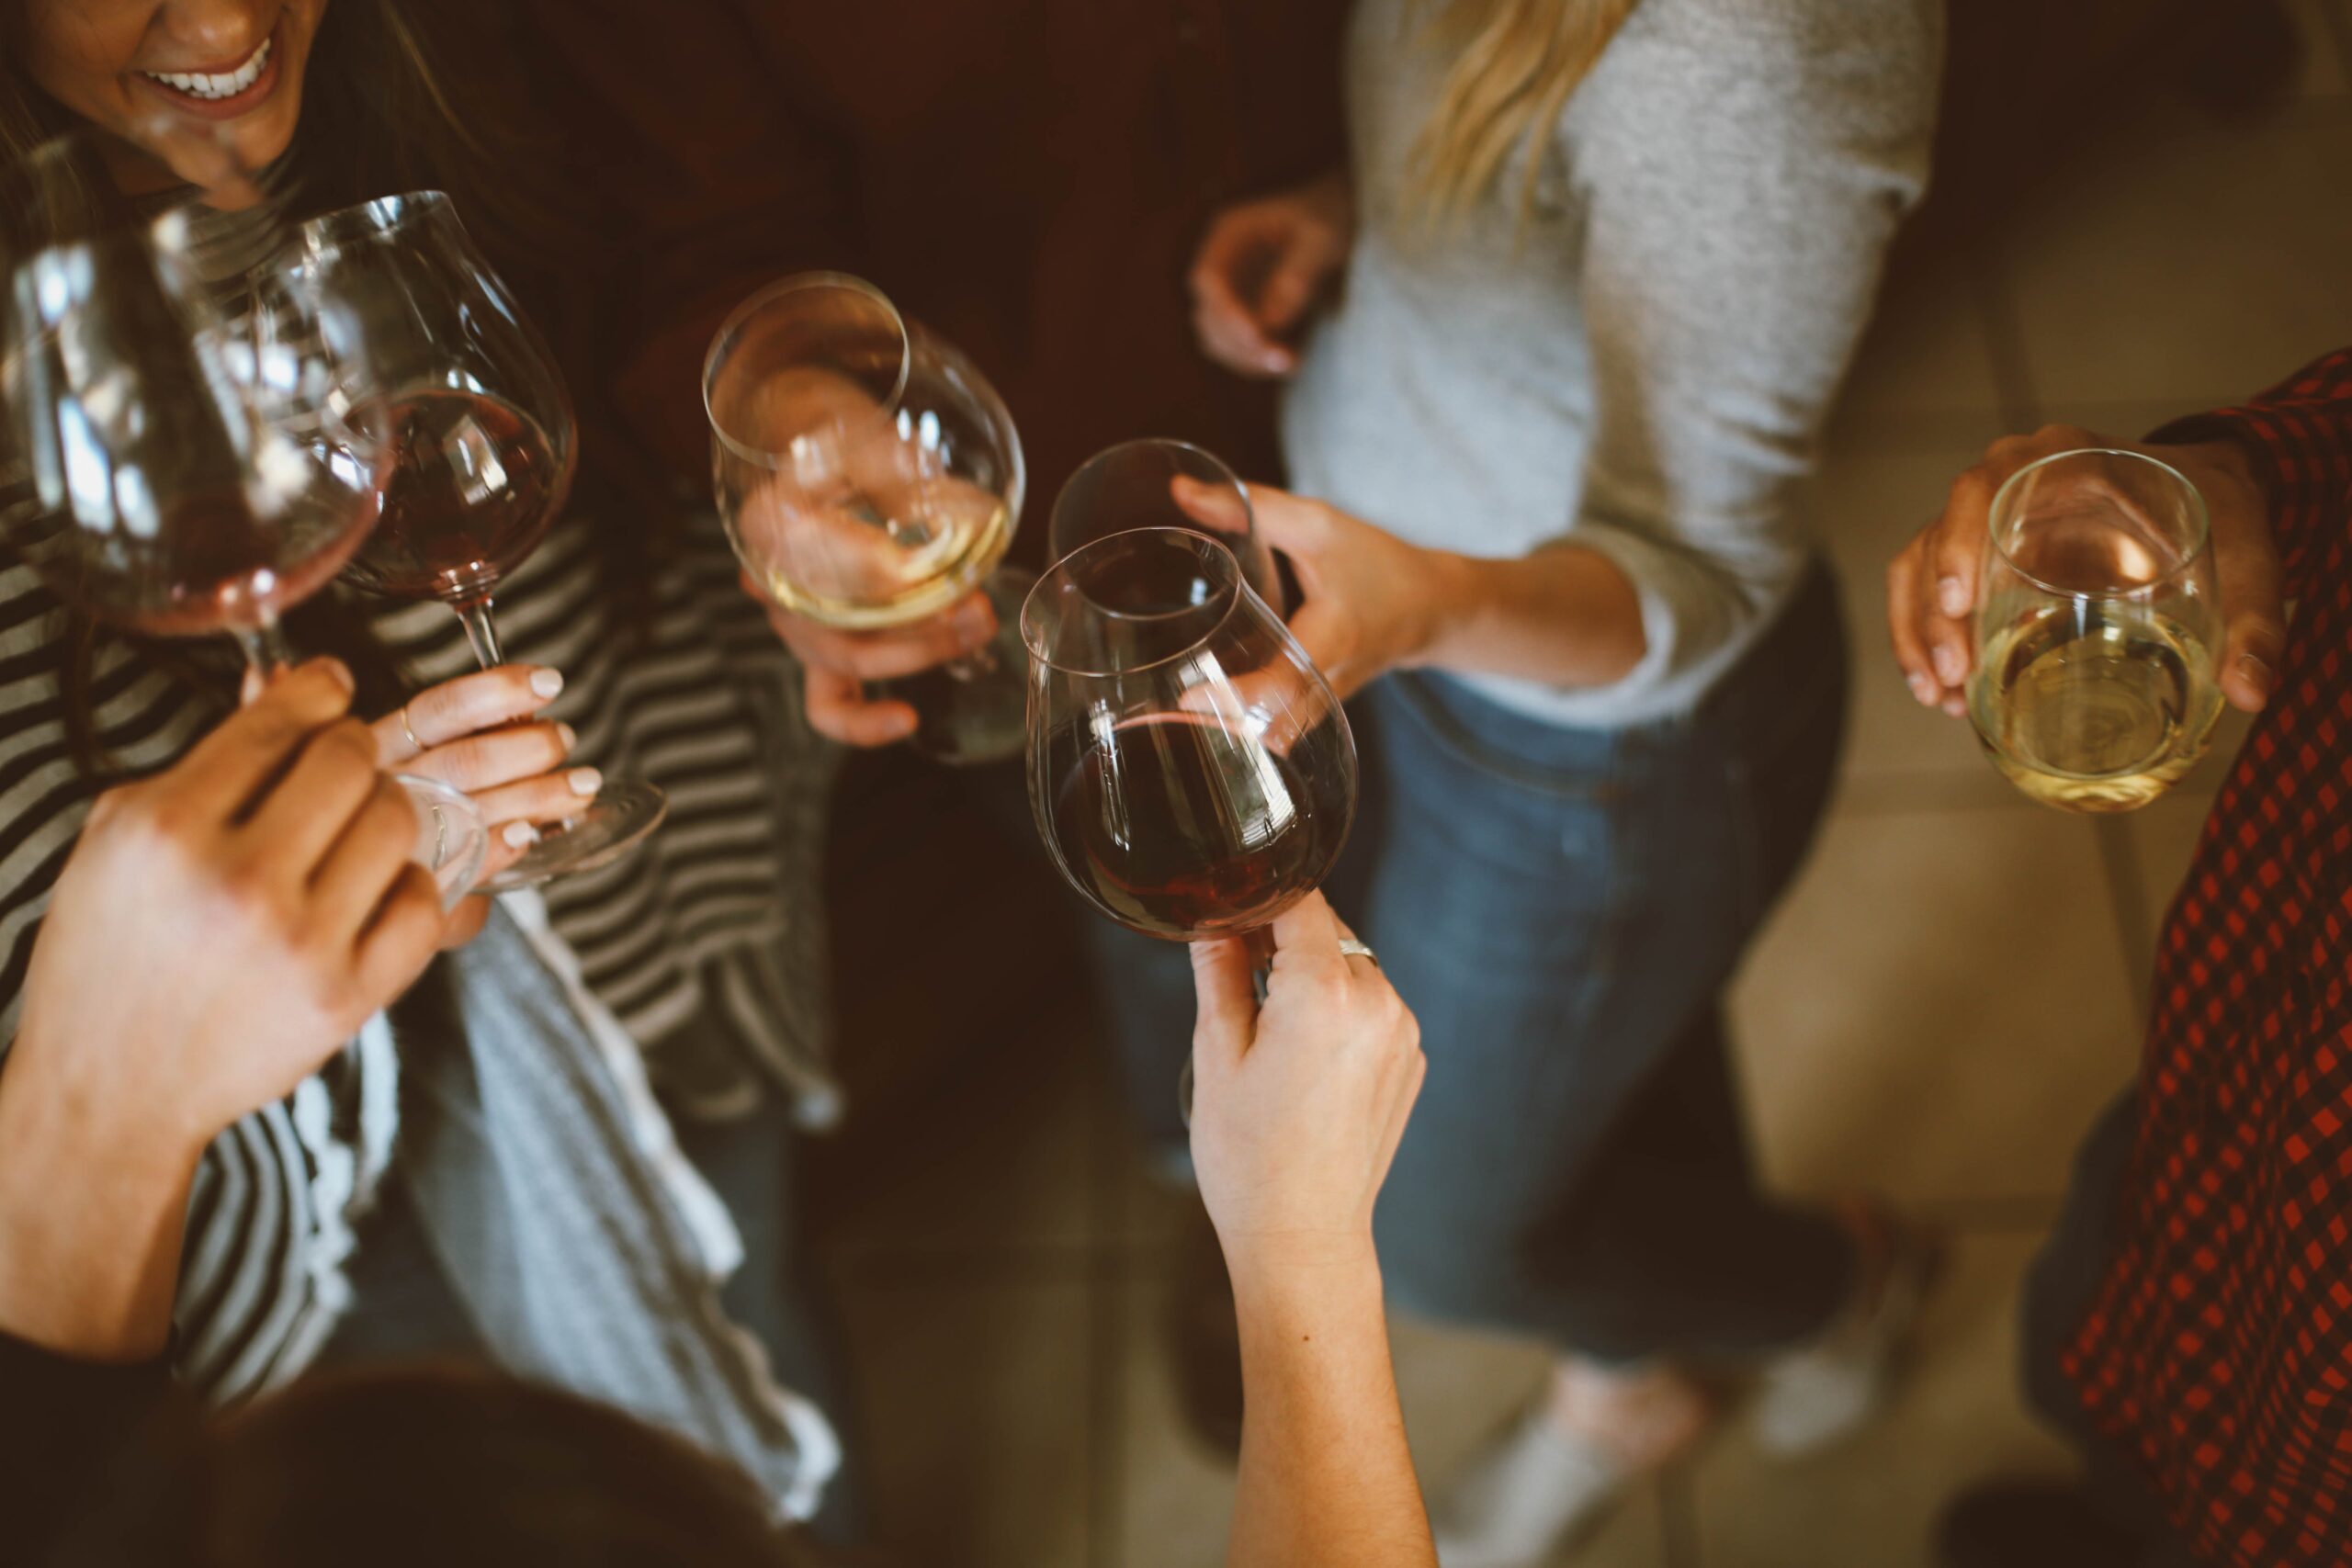 Boomers & Millennials: how relationship with wine has changed.